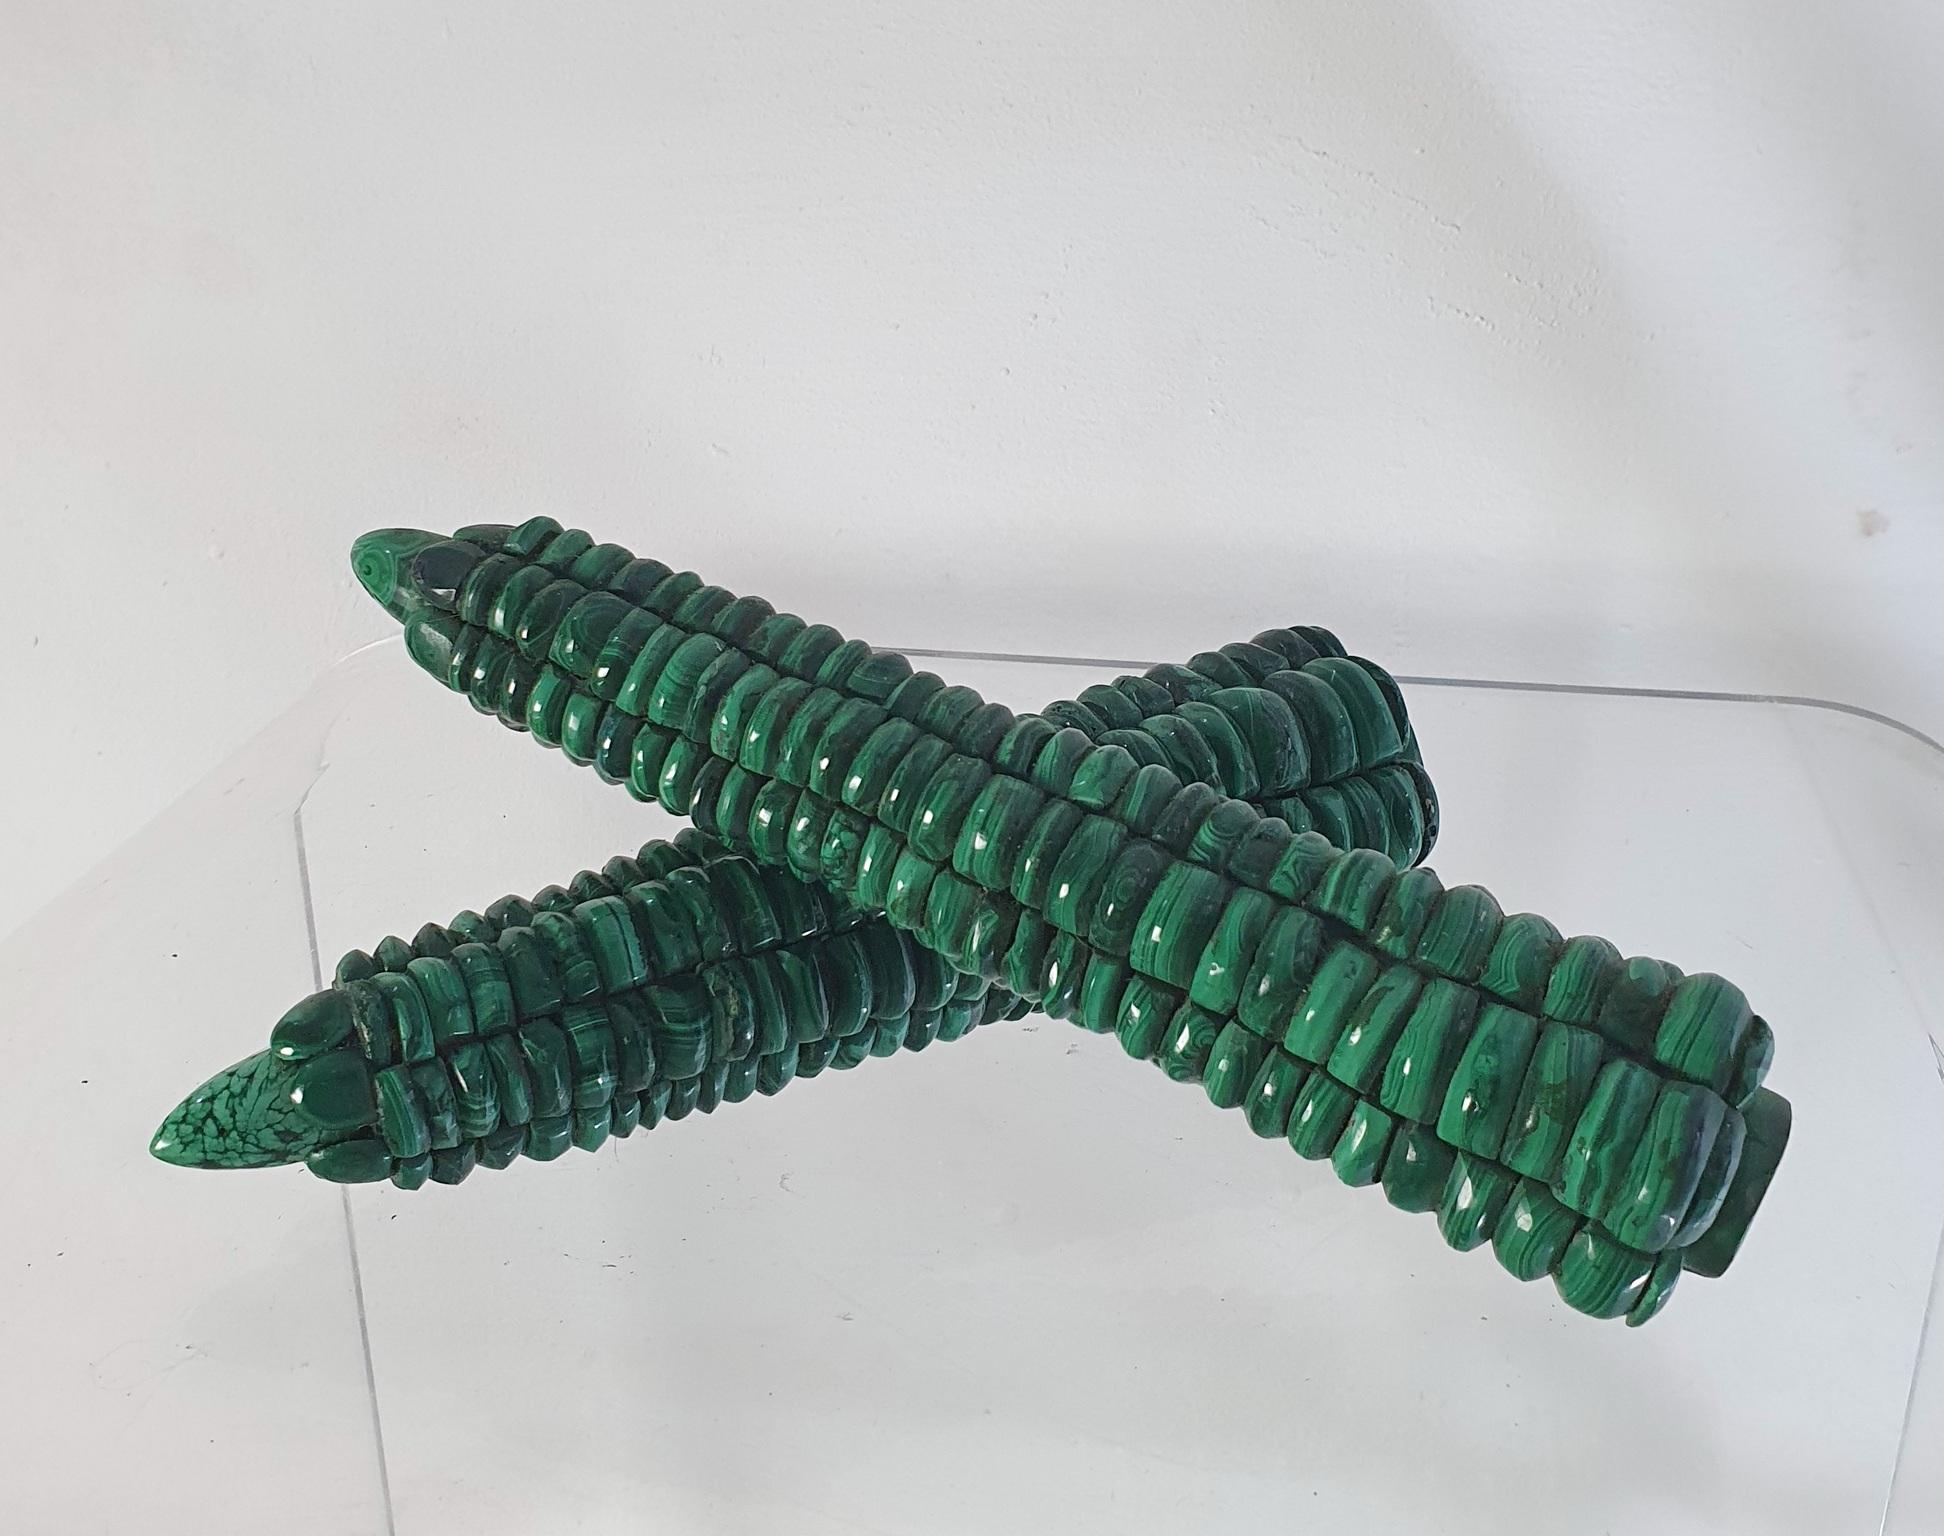 A pair of handmade corn on the cob in malachite intended for decoration.